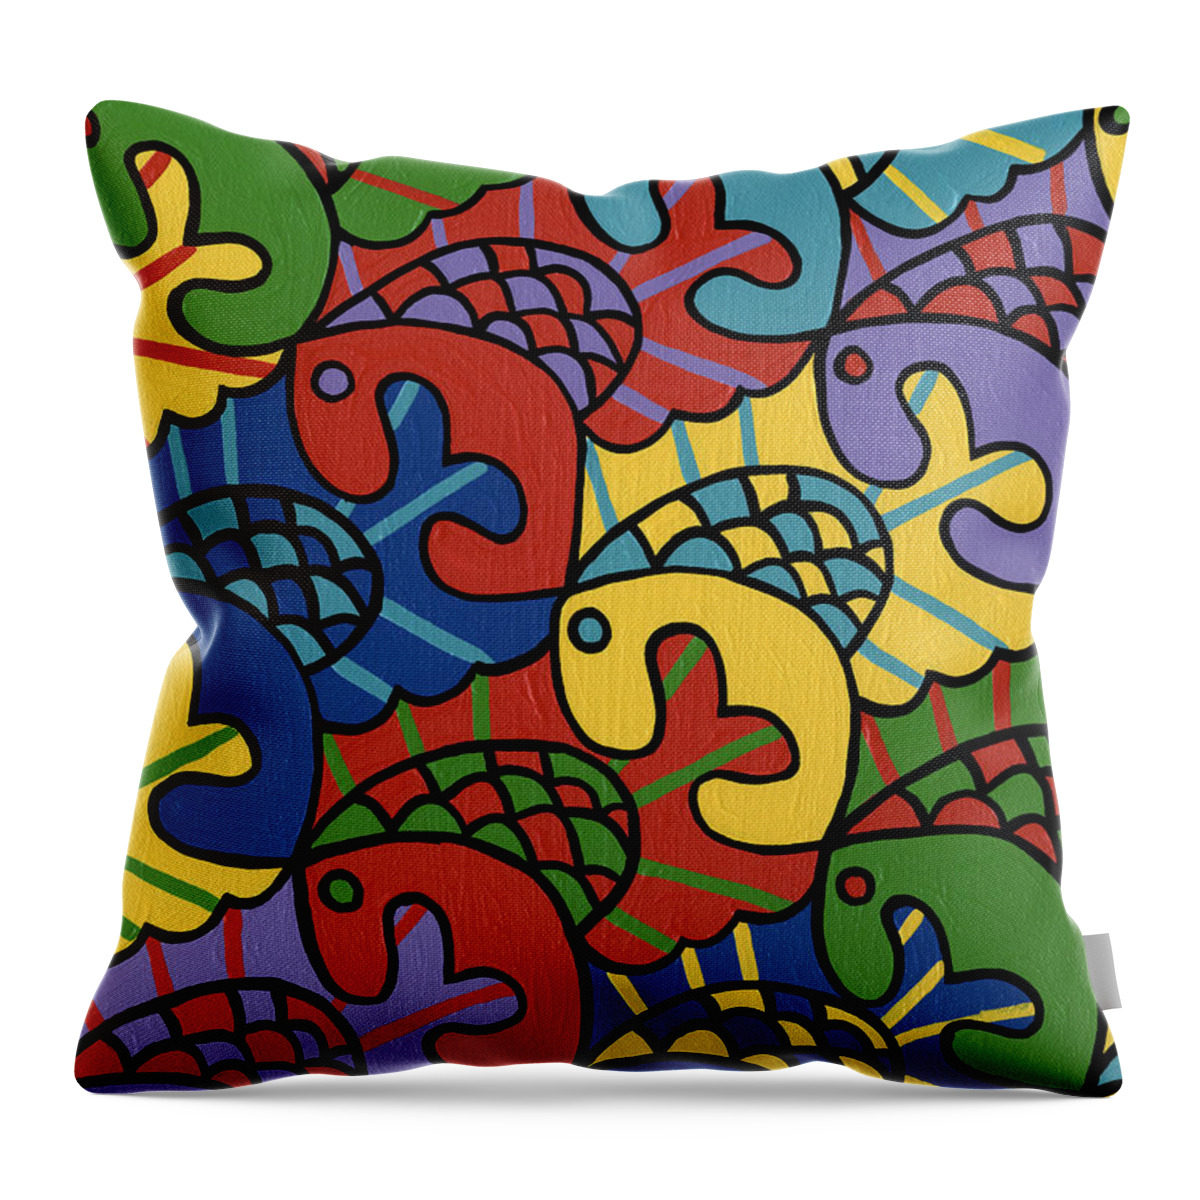 Tessellation Throw Pillow featuring the painting Fish Eat Fish by Mike Segal